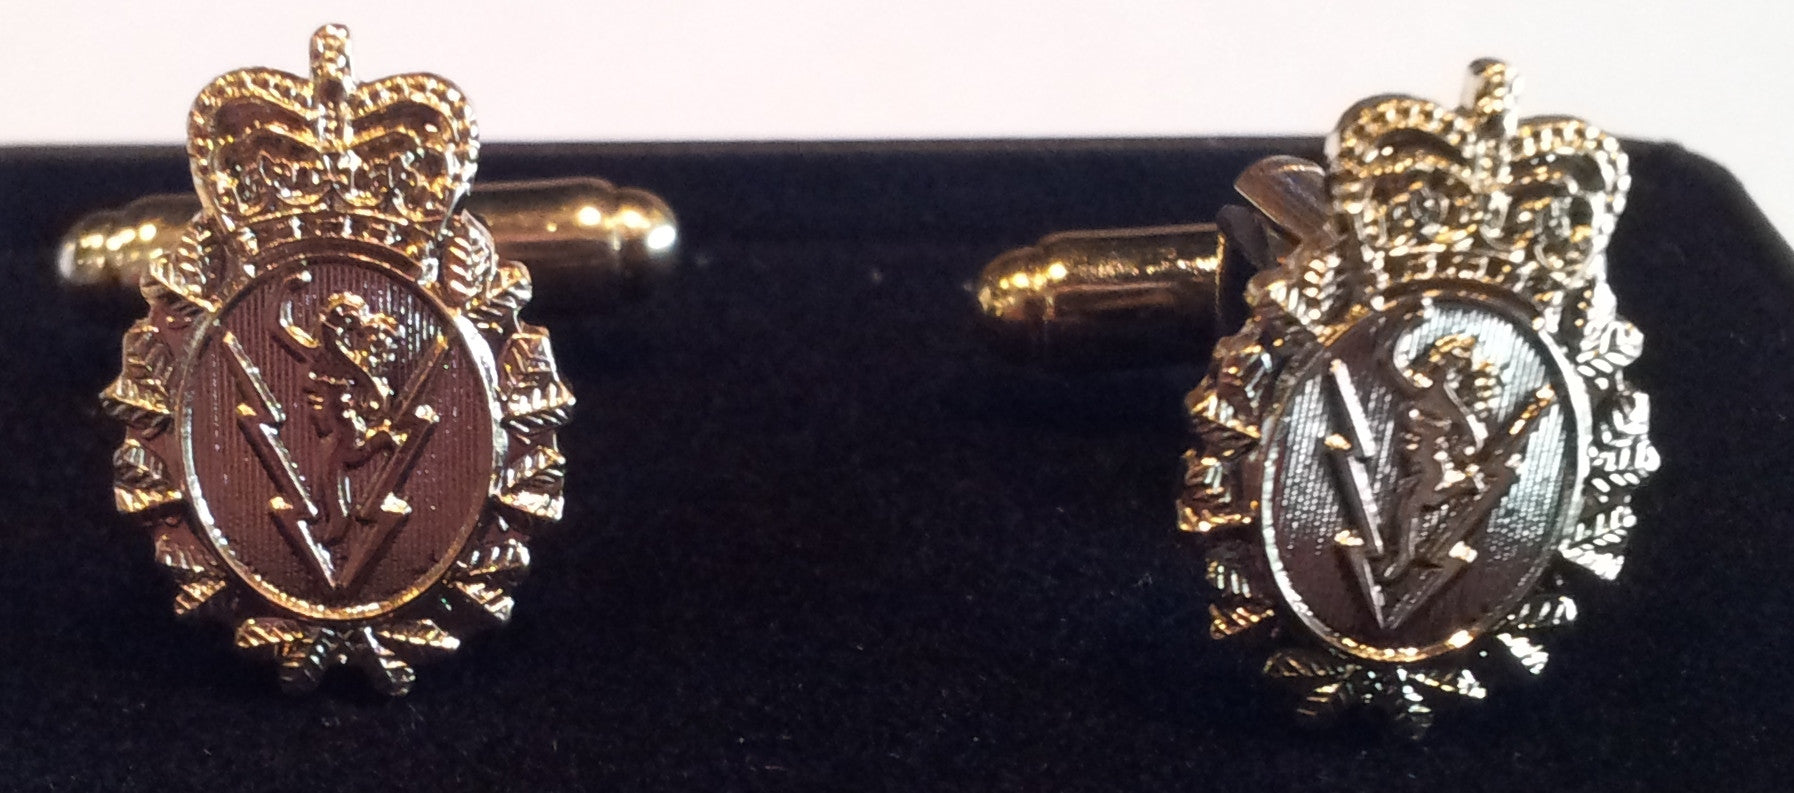 Gold cufflinks with the C&E crest.